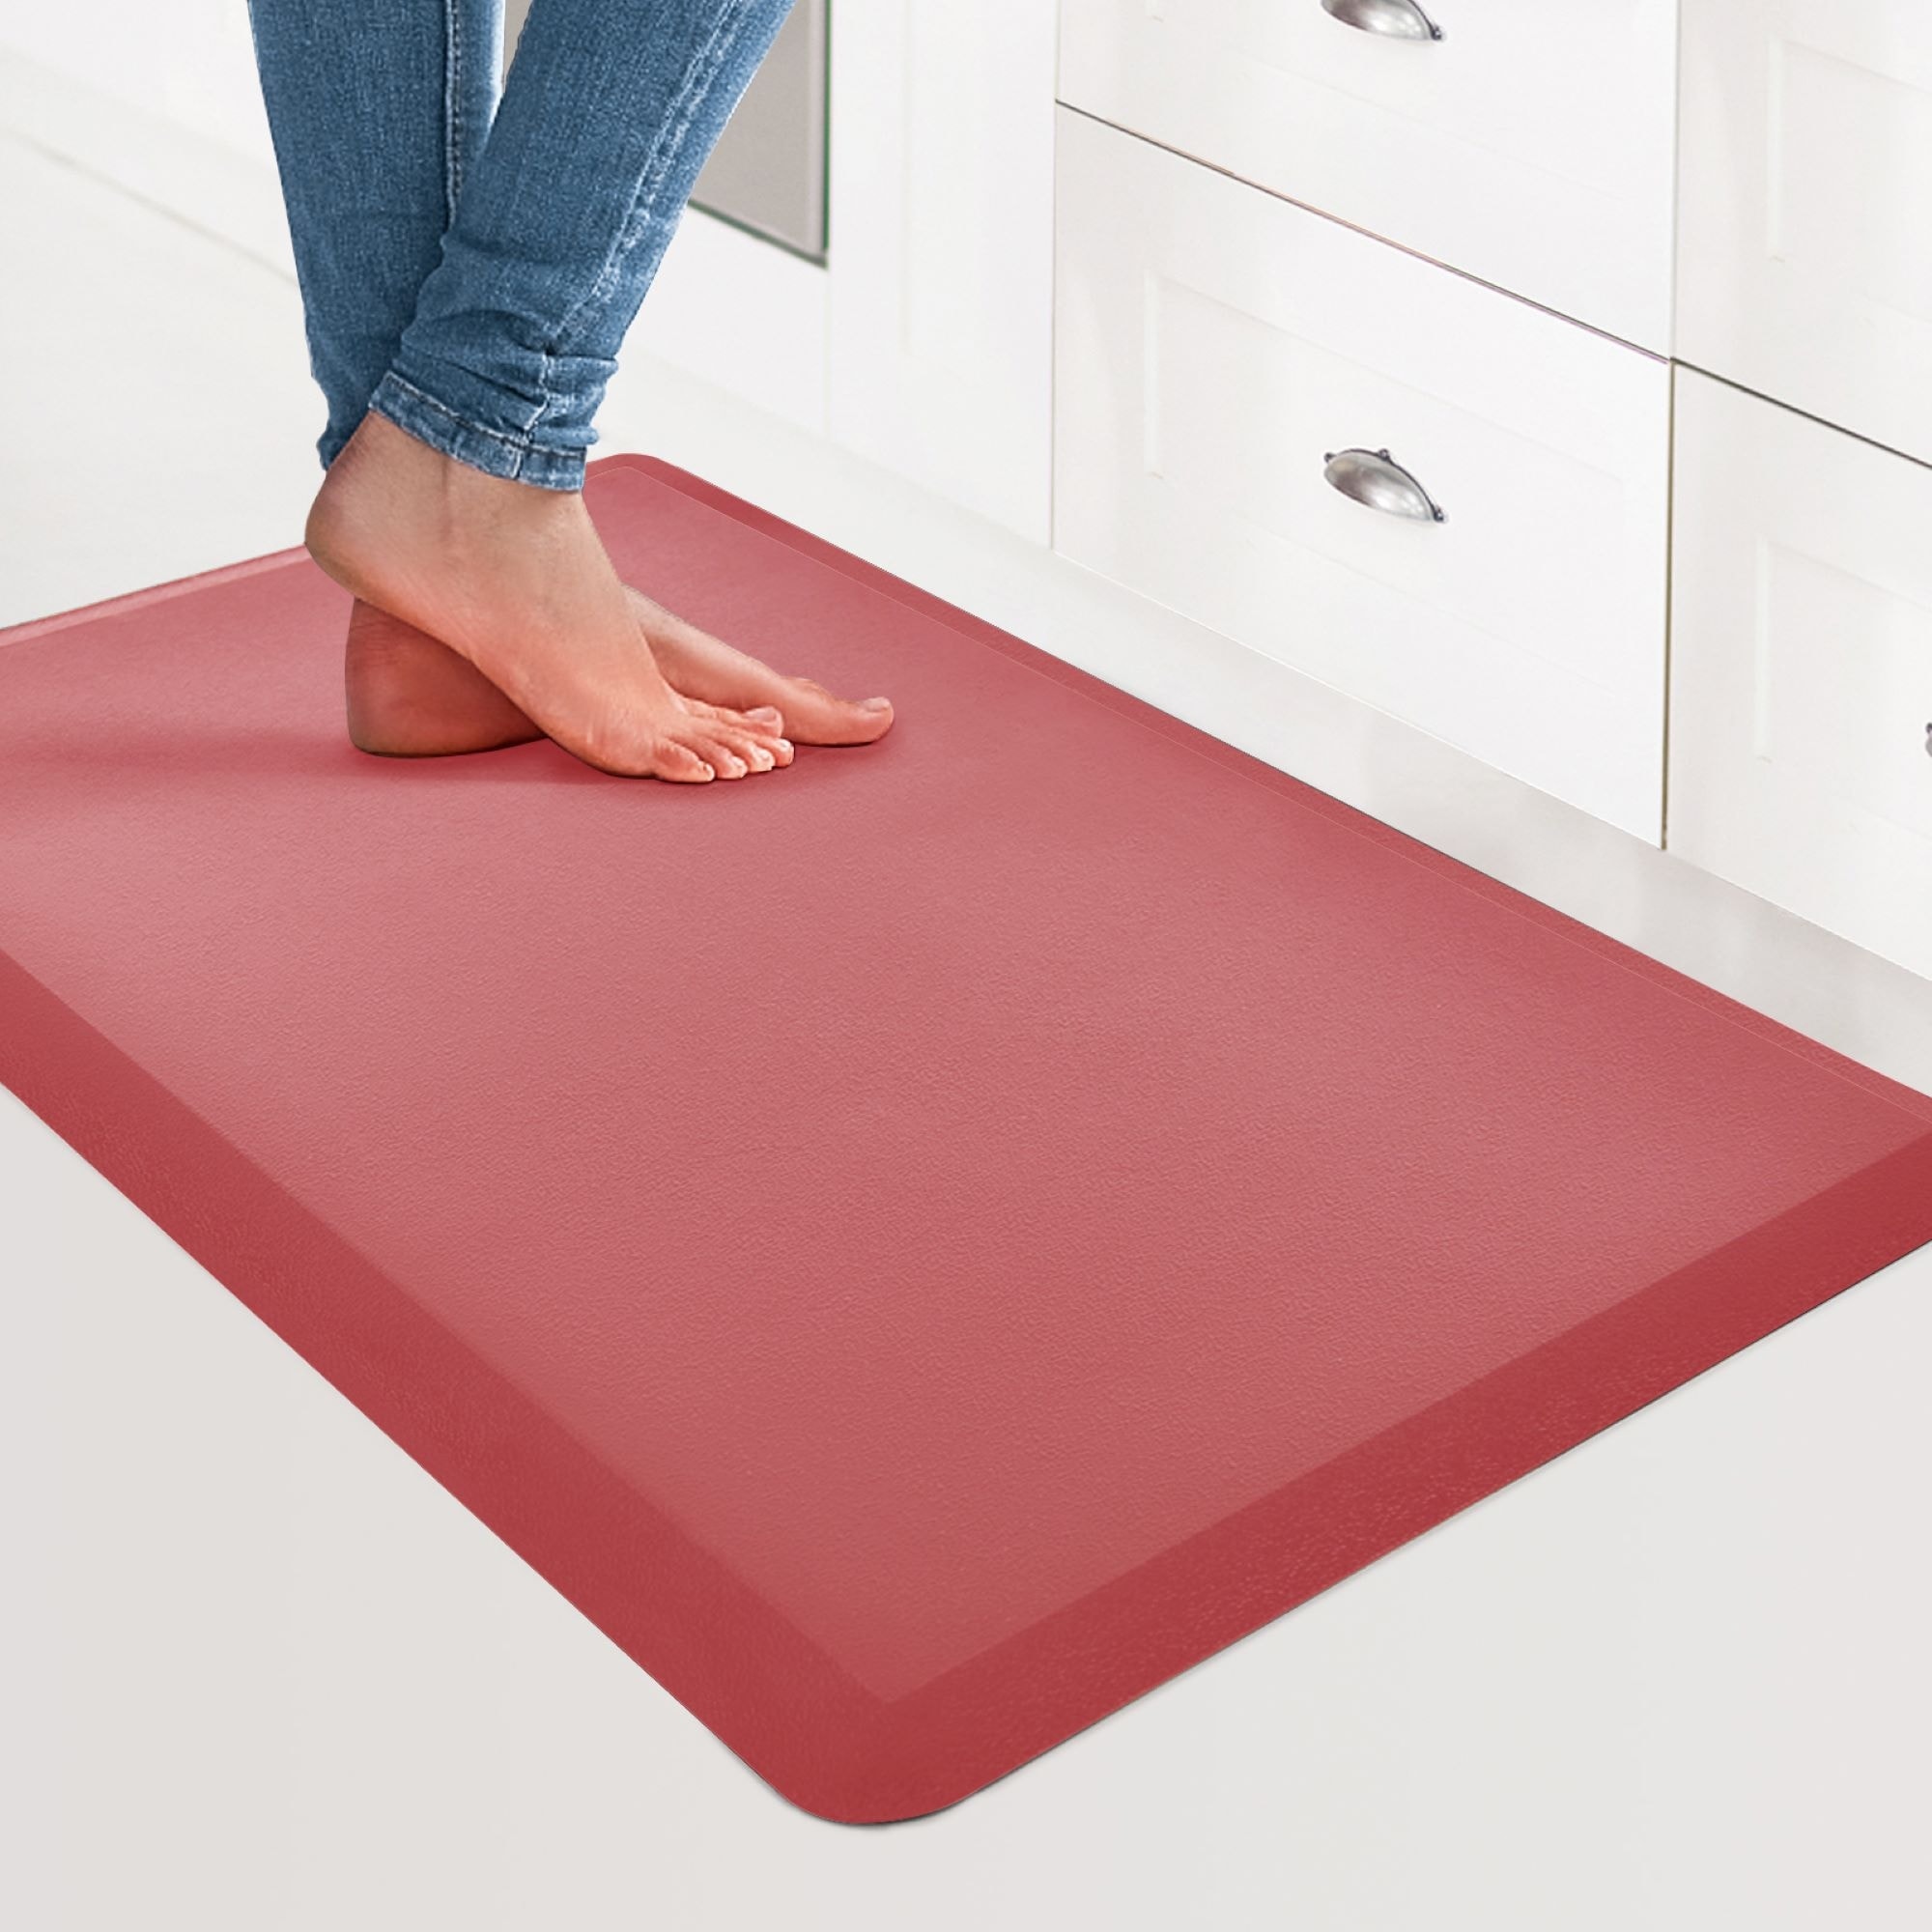 DEXI Kitchen Rugs and Mats Non-Slip Absorbent Mats for Kitchen